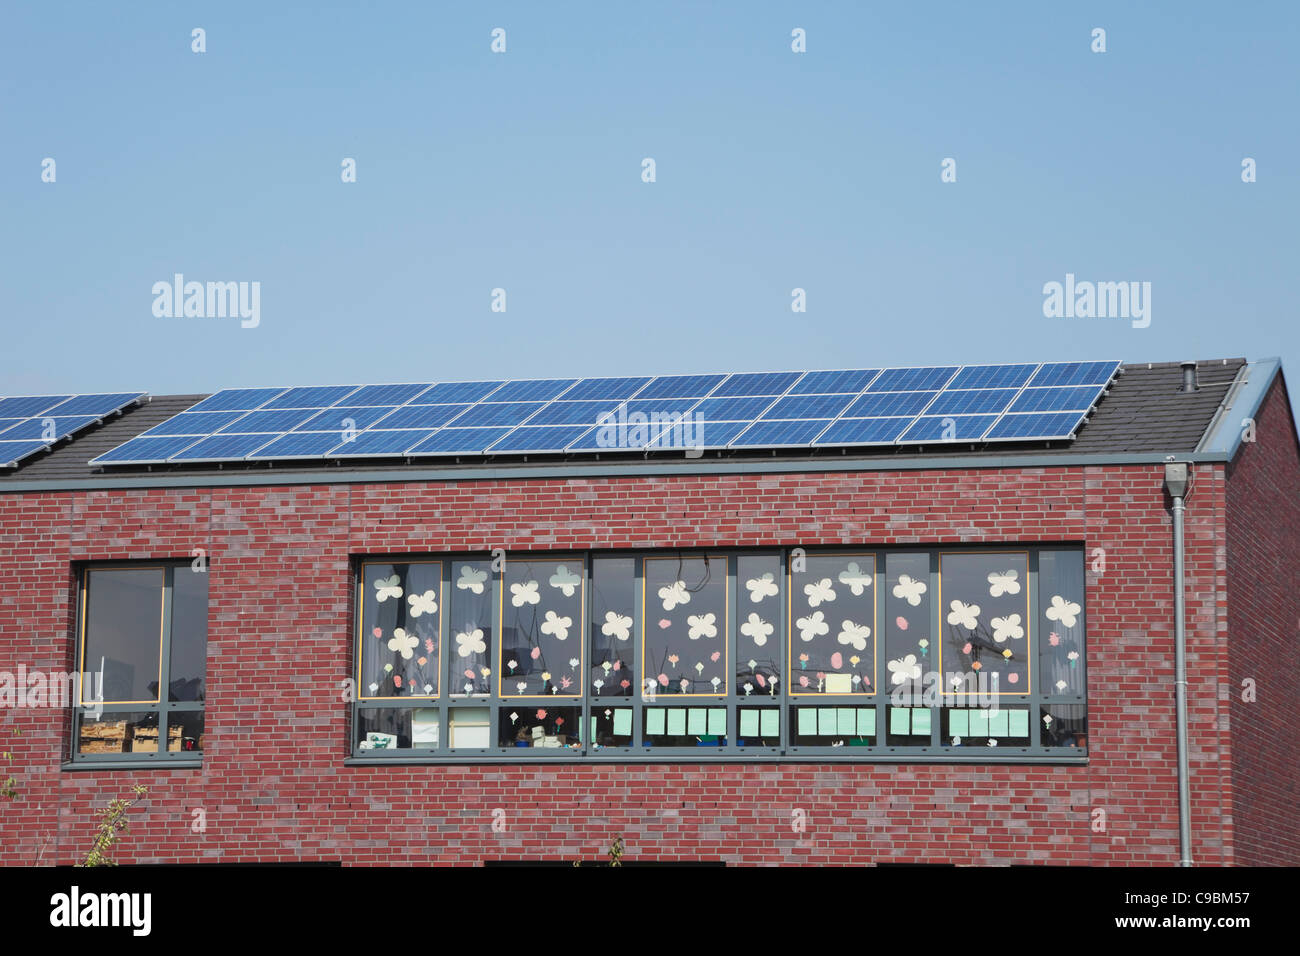 Germany, Cologne, Roof of school building with solar panels Stock Photo